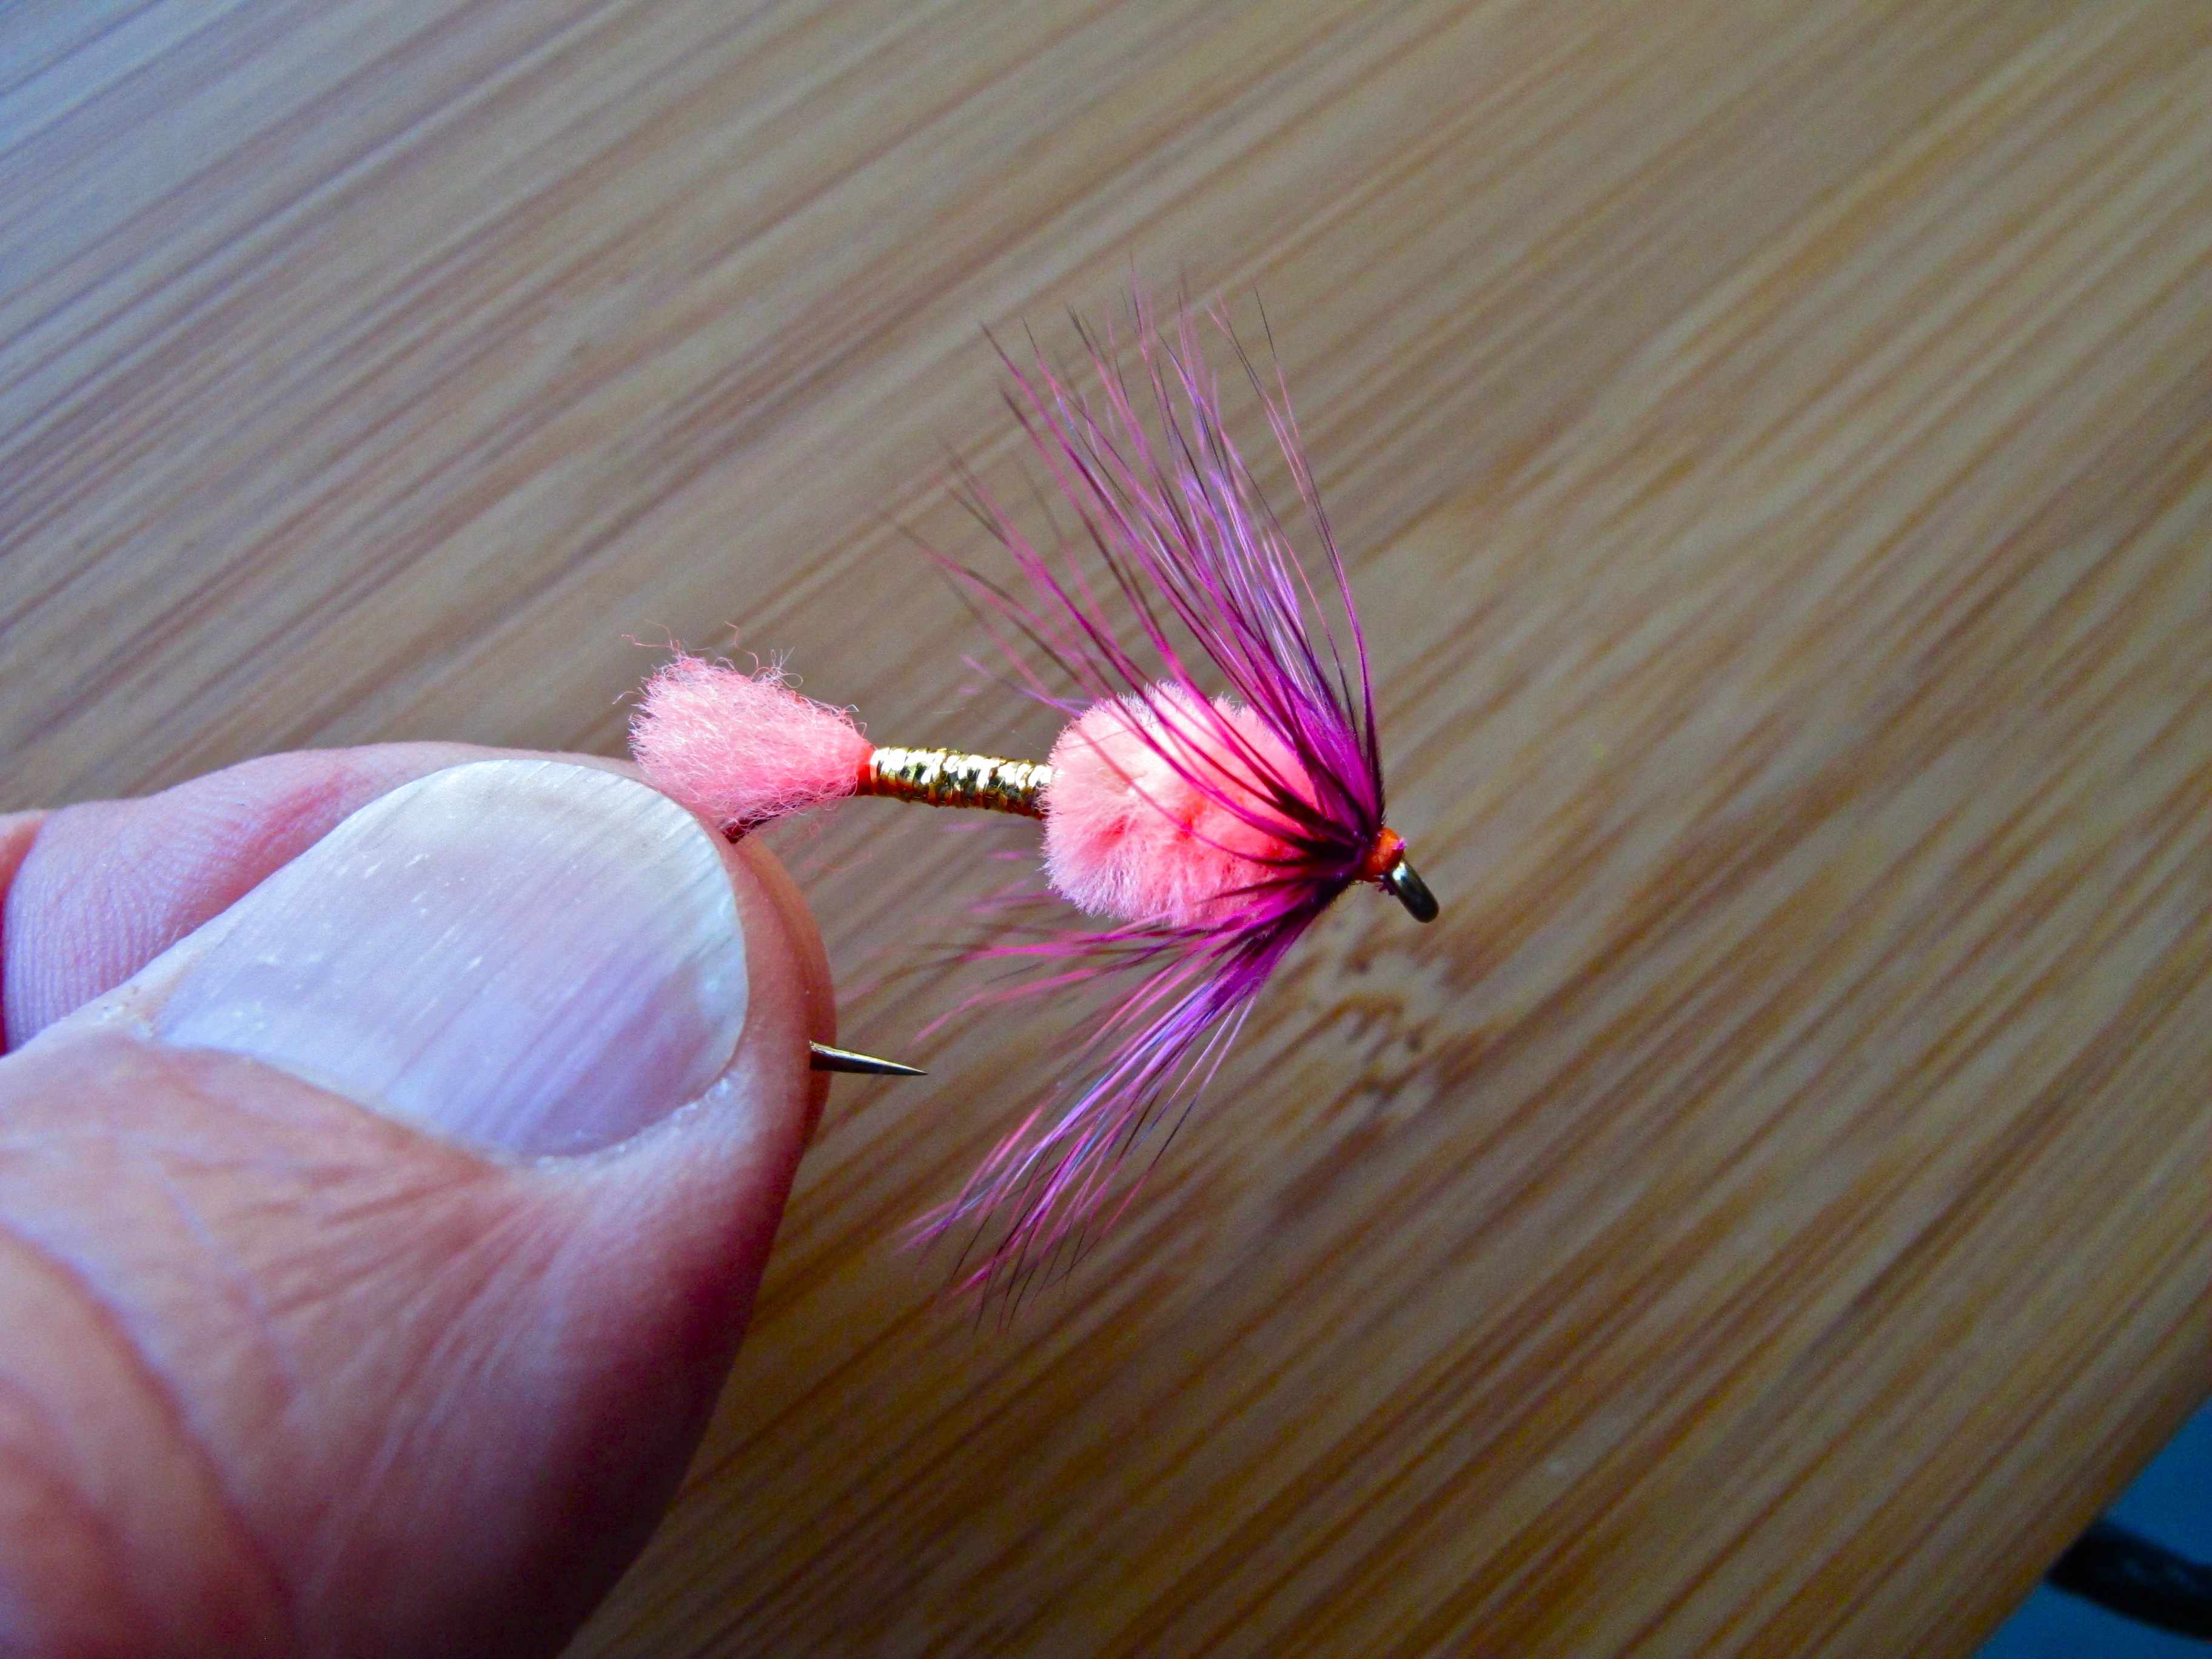 Jay's Thoughts on Sea Run Cutthroat Fly Patterns . . . . .